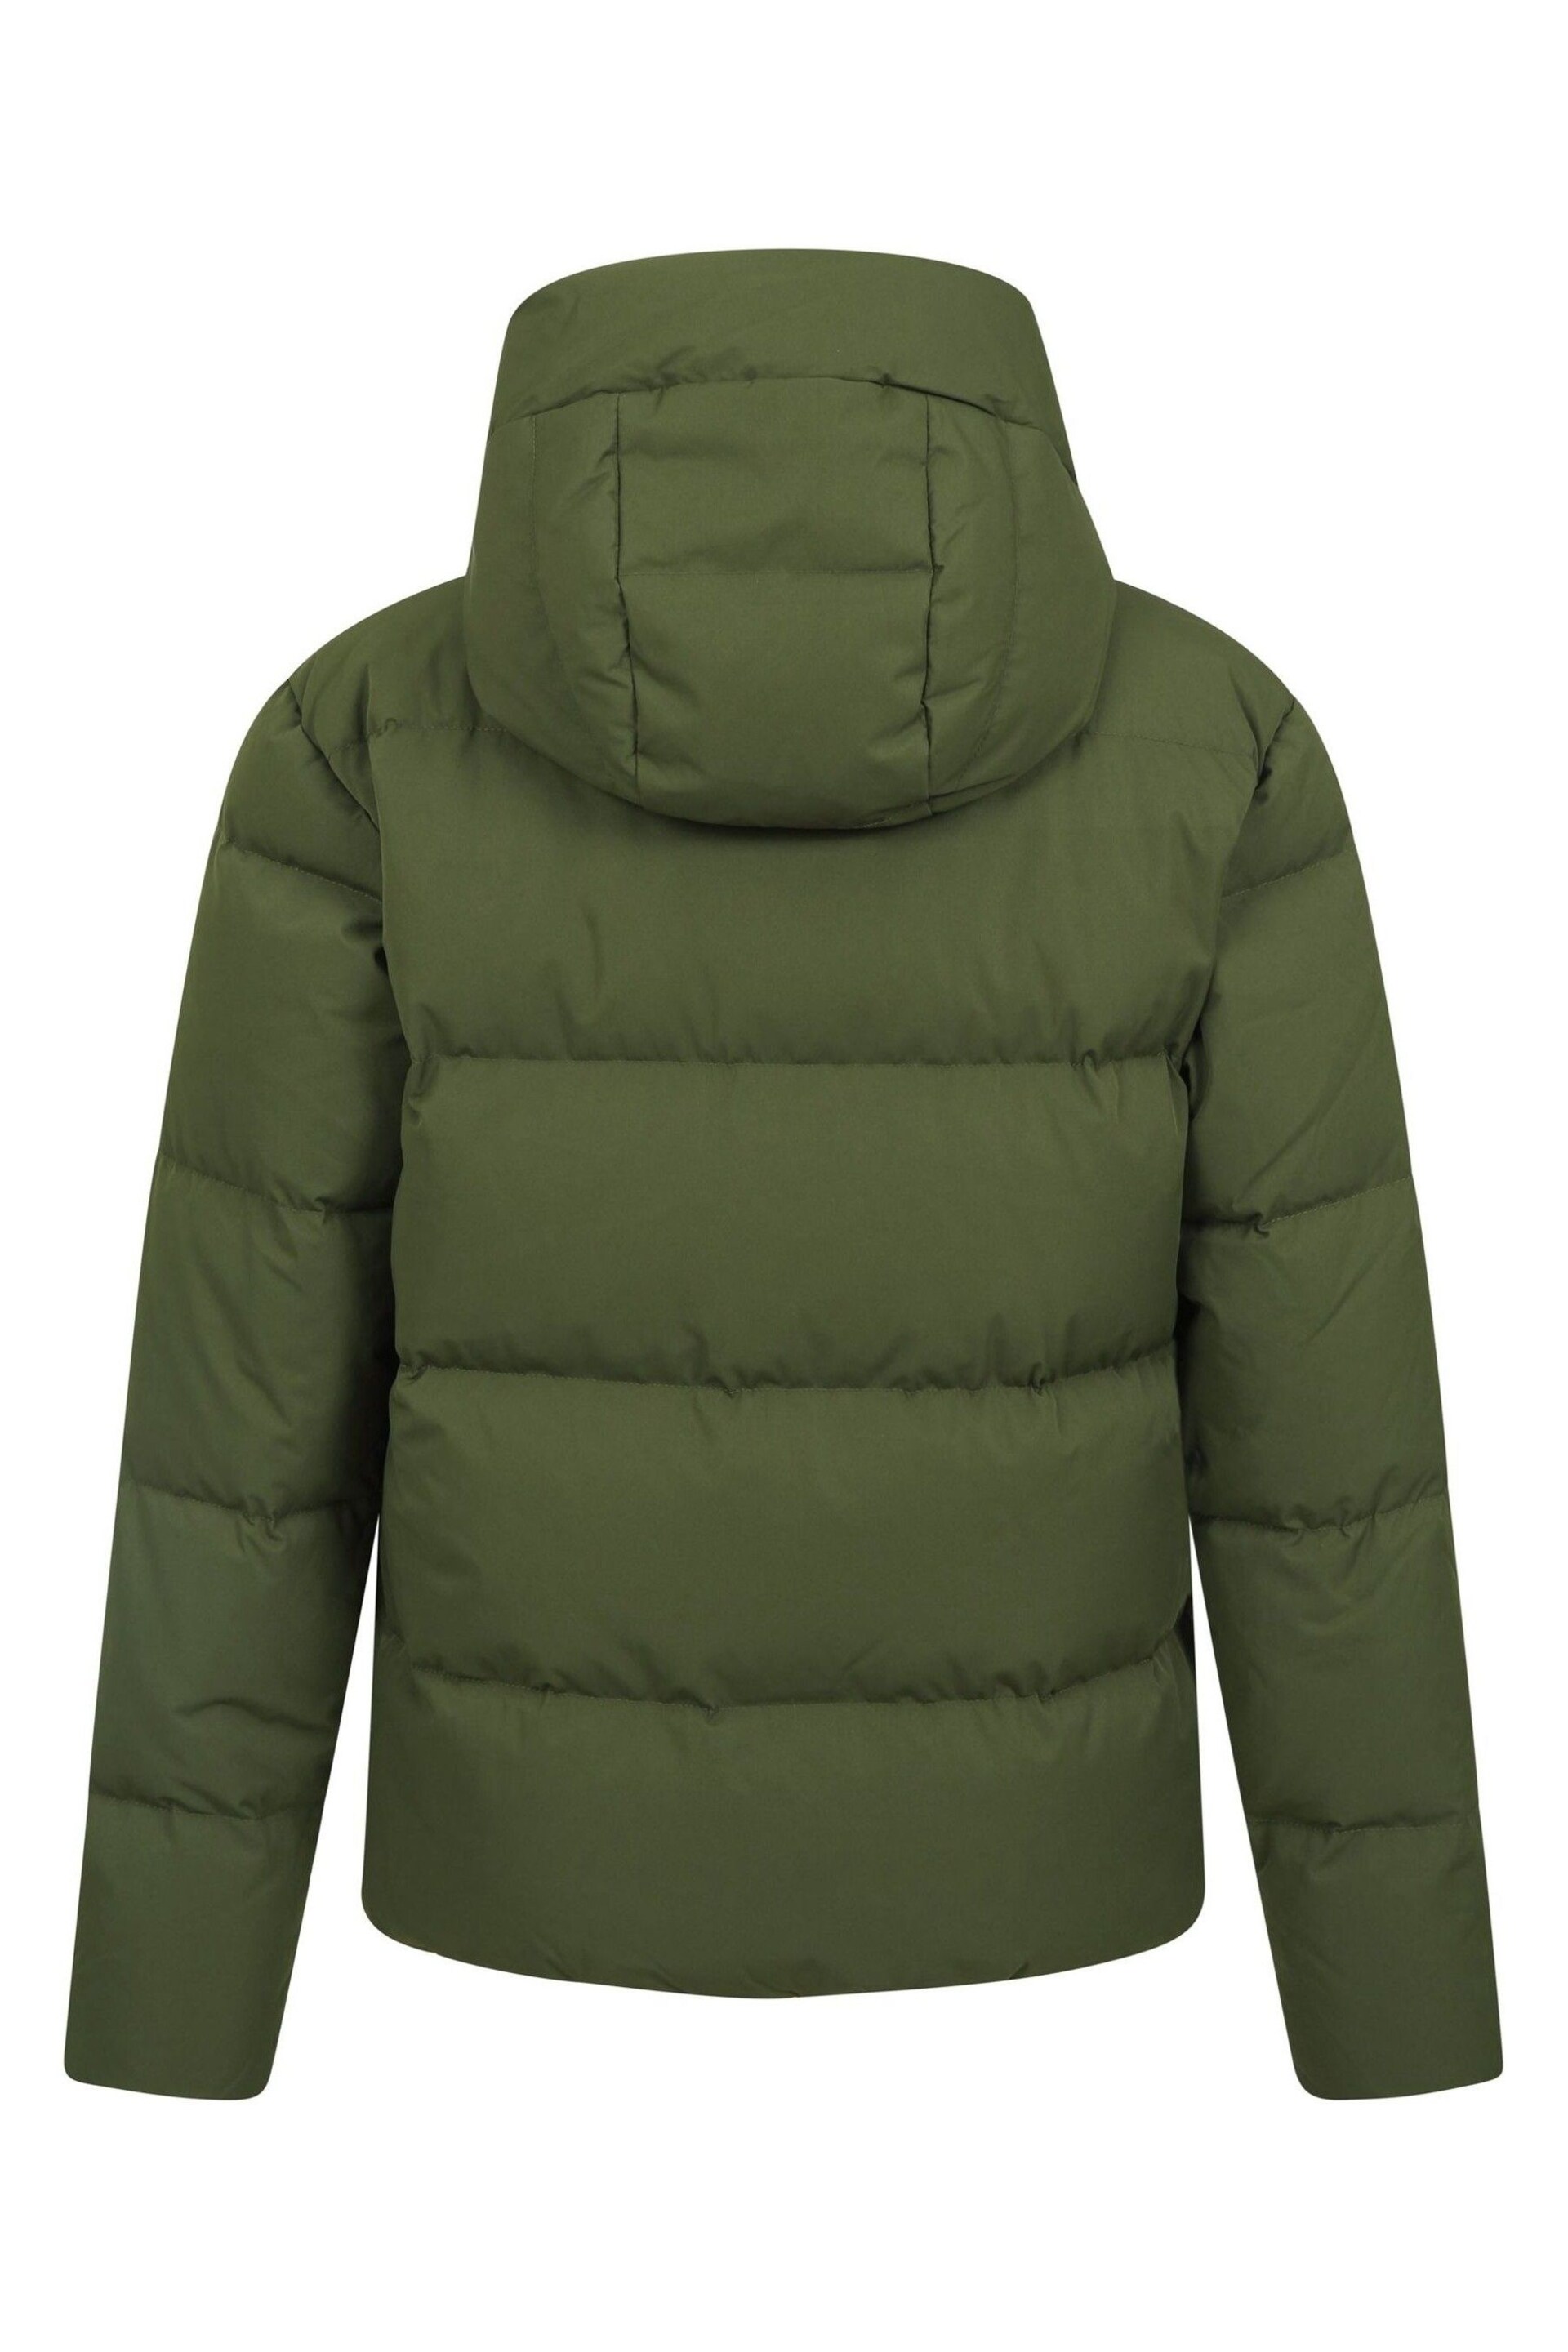 Mountain Warehouse Green Womens Cosy Extreme Short Down Jacket - Image 3 of 5